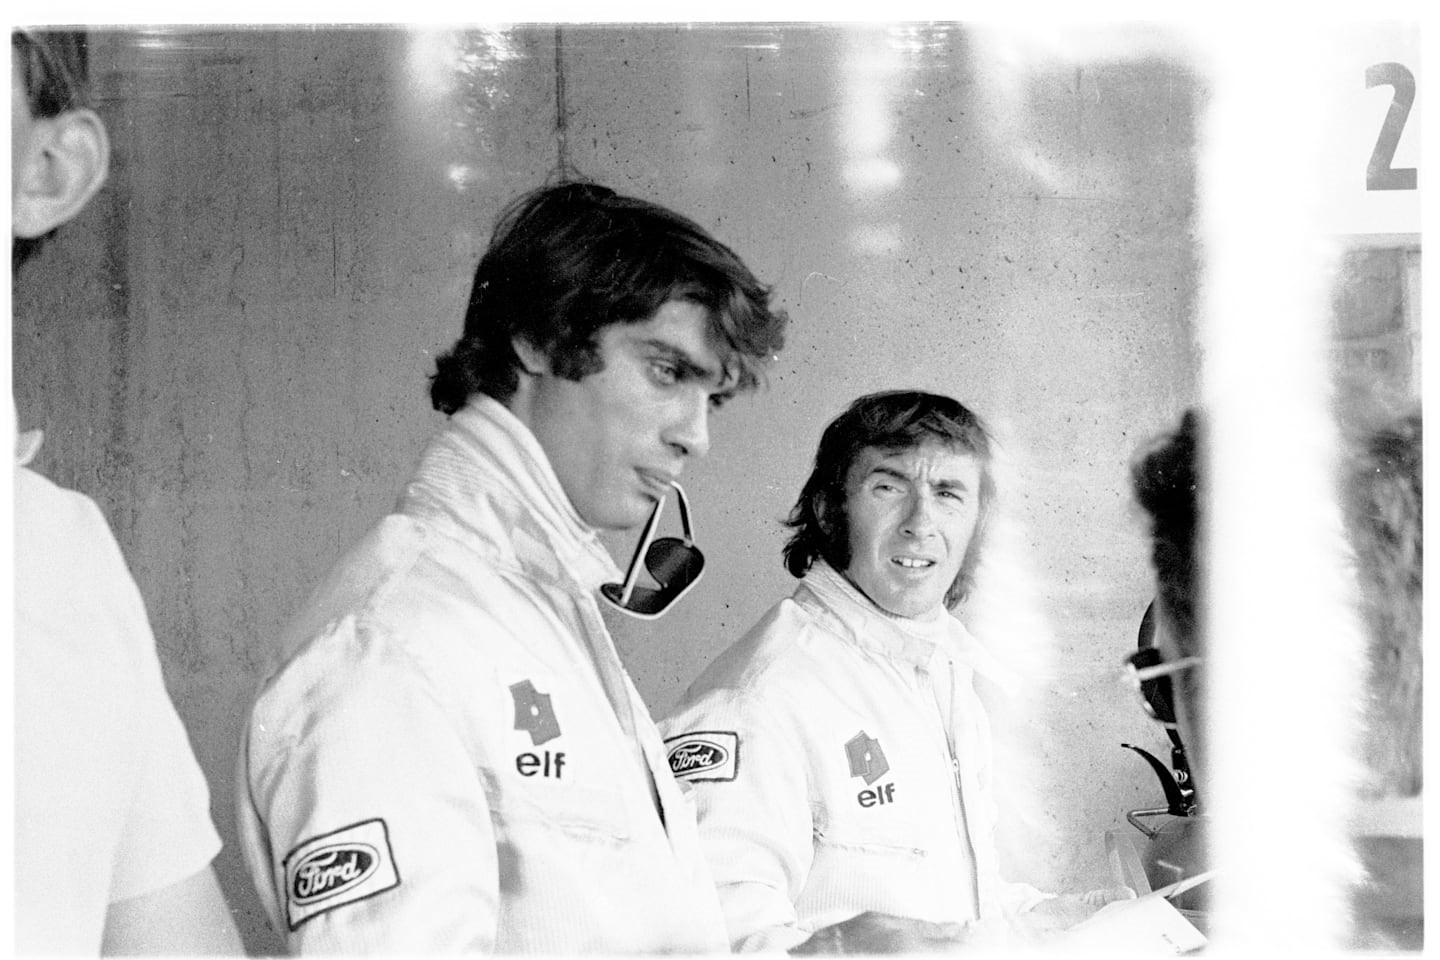 Here we see Jackie Stewart and François Cevert in the pits. 